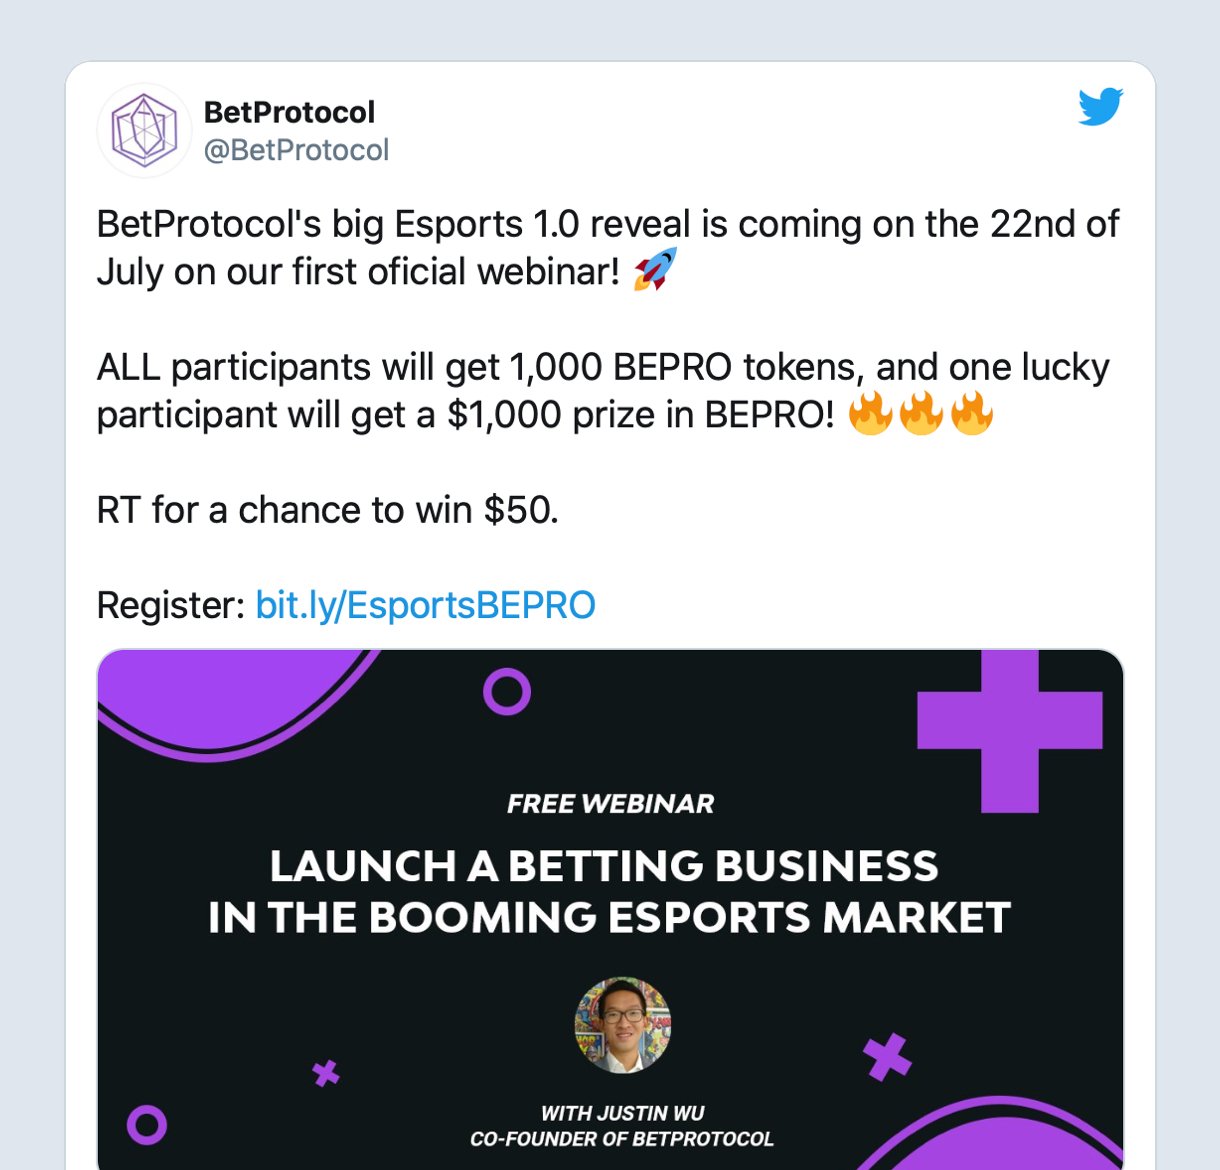 Webinar announcement promotion to increase engagement example by BetProtocol